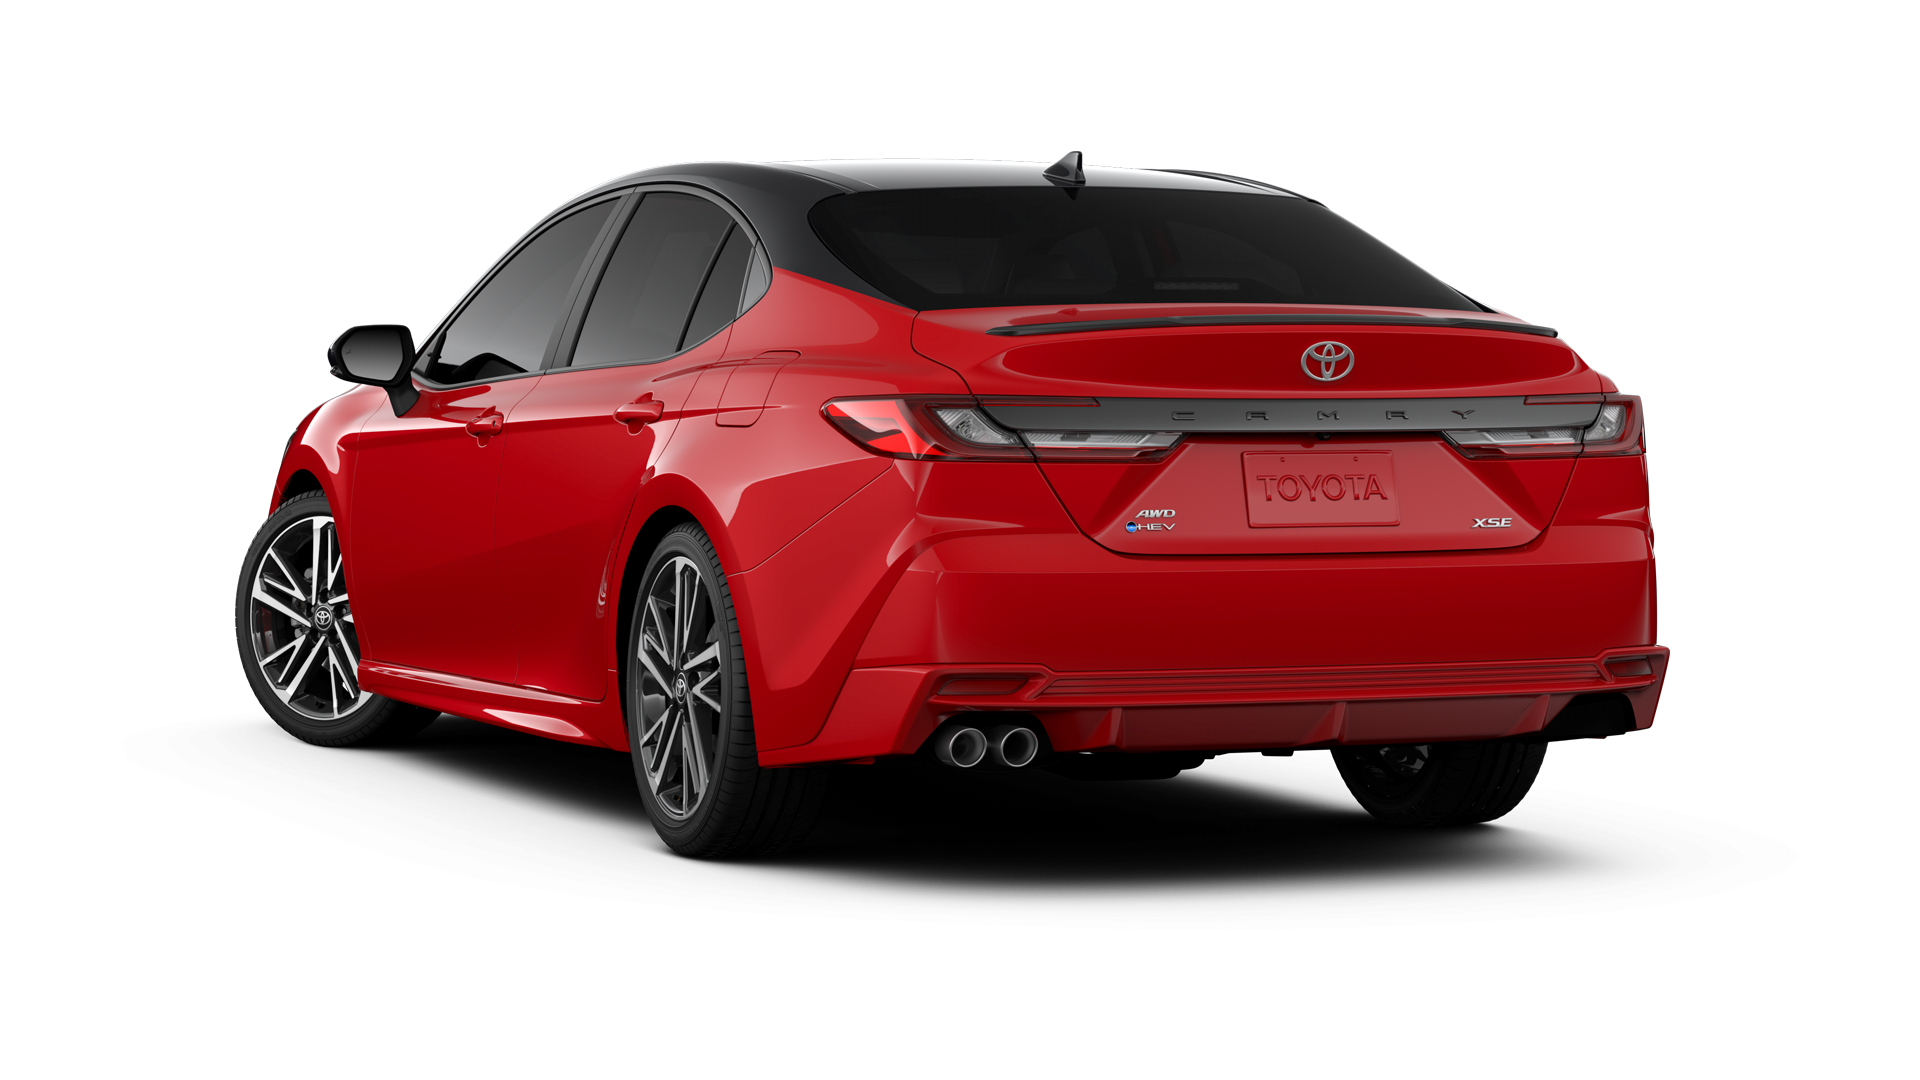 2025 Toyota Camry in Supersonic Red/Midnight Black Metallic Roof*.